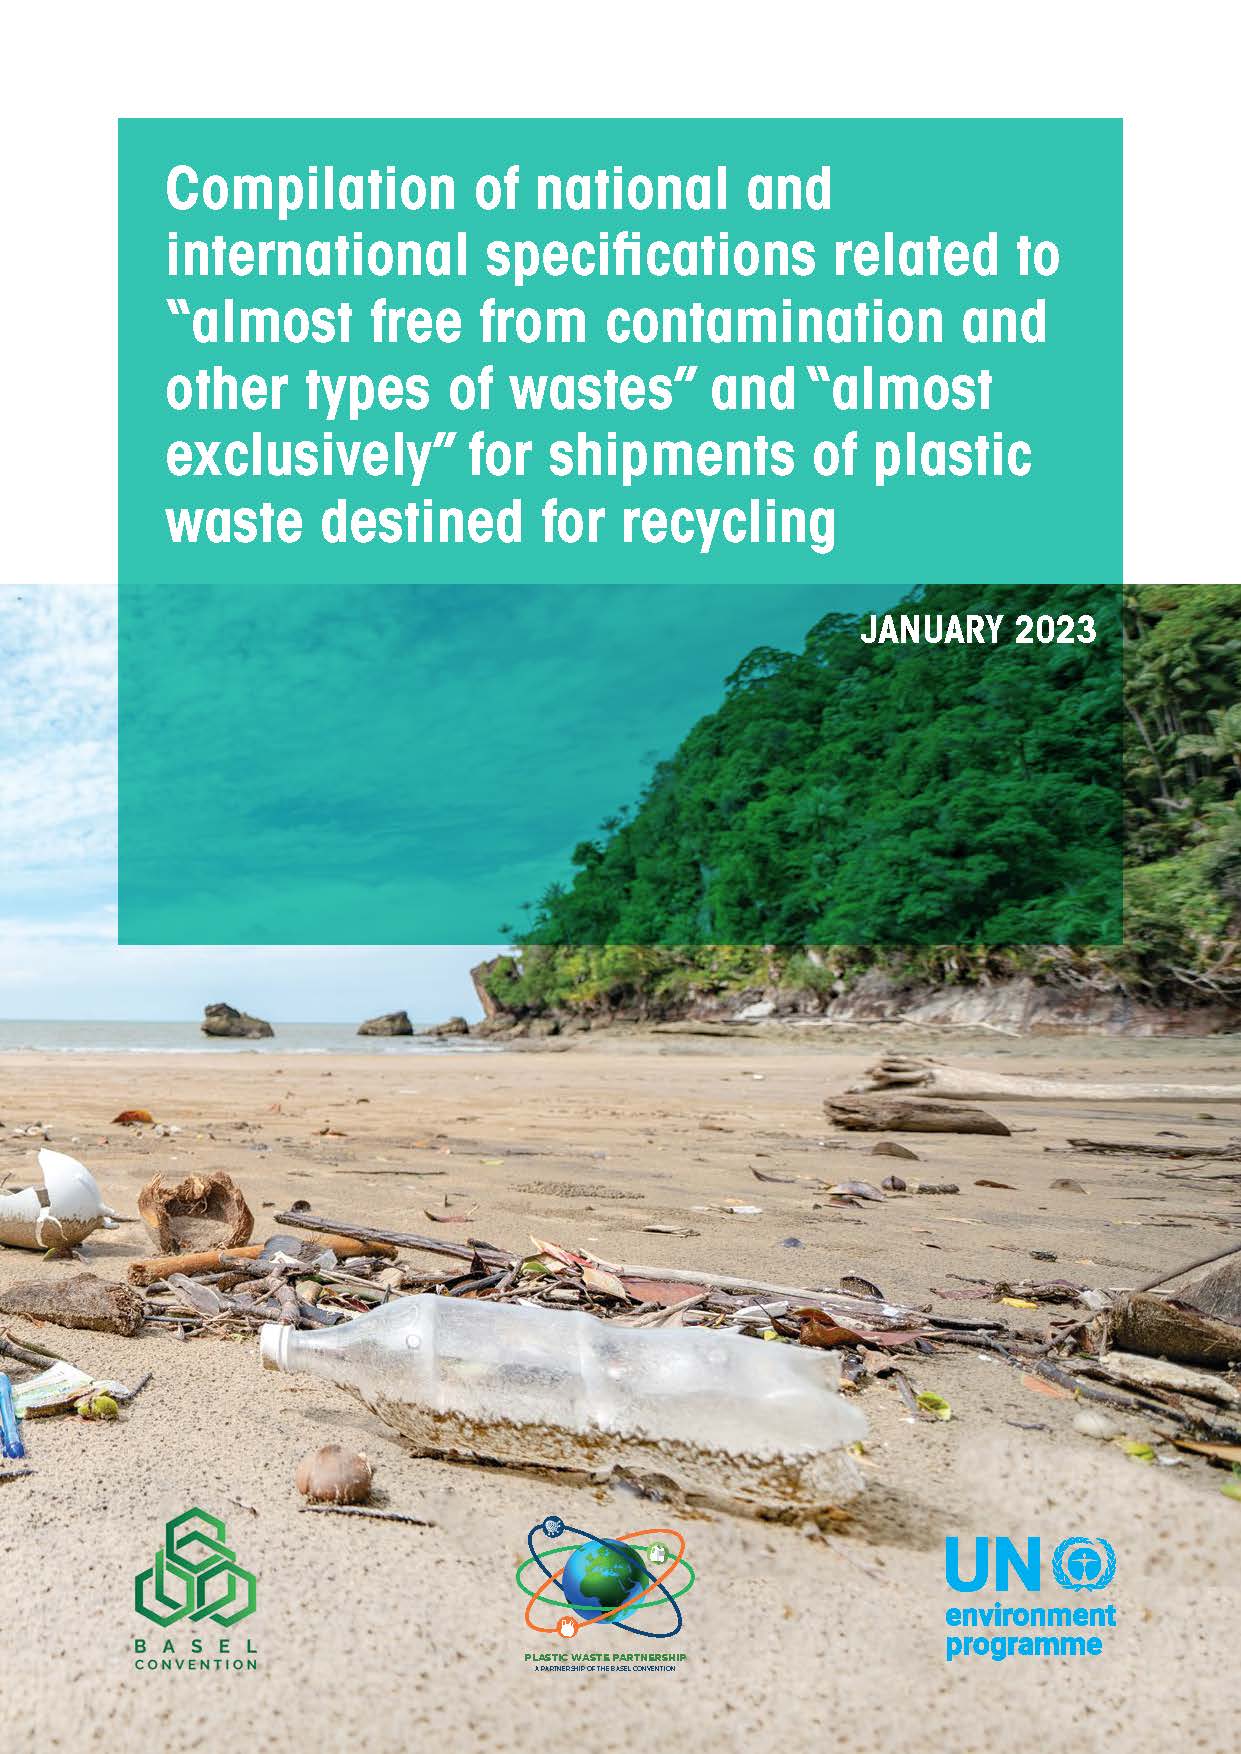 Compilation of national and international specifications related to “almost free from contamination and other types of wastes” and “almost exclusively” for shipments of plastic waste destined for recycling